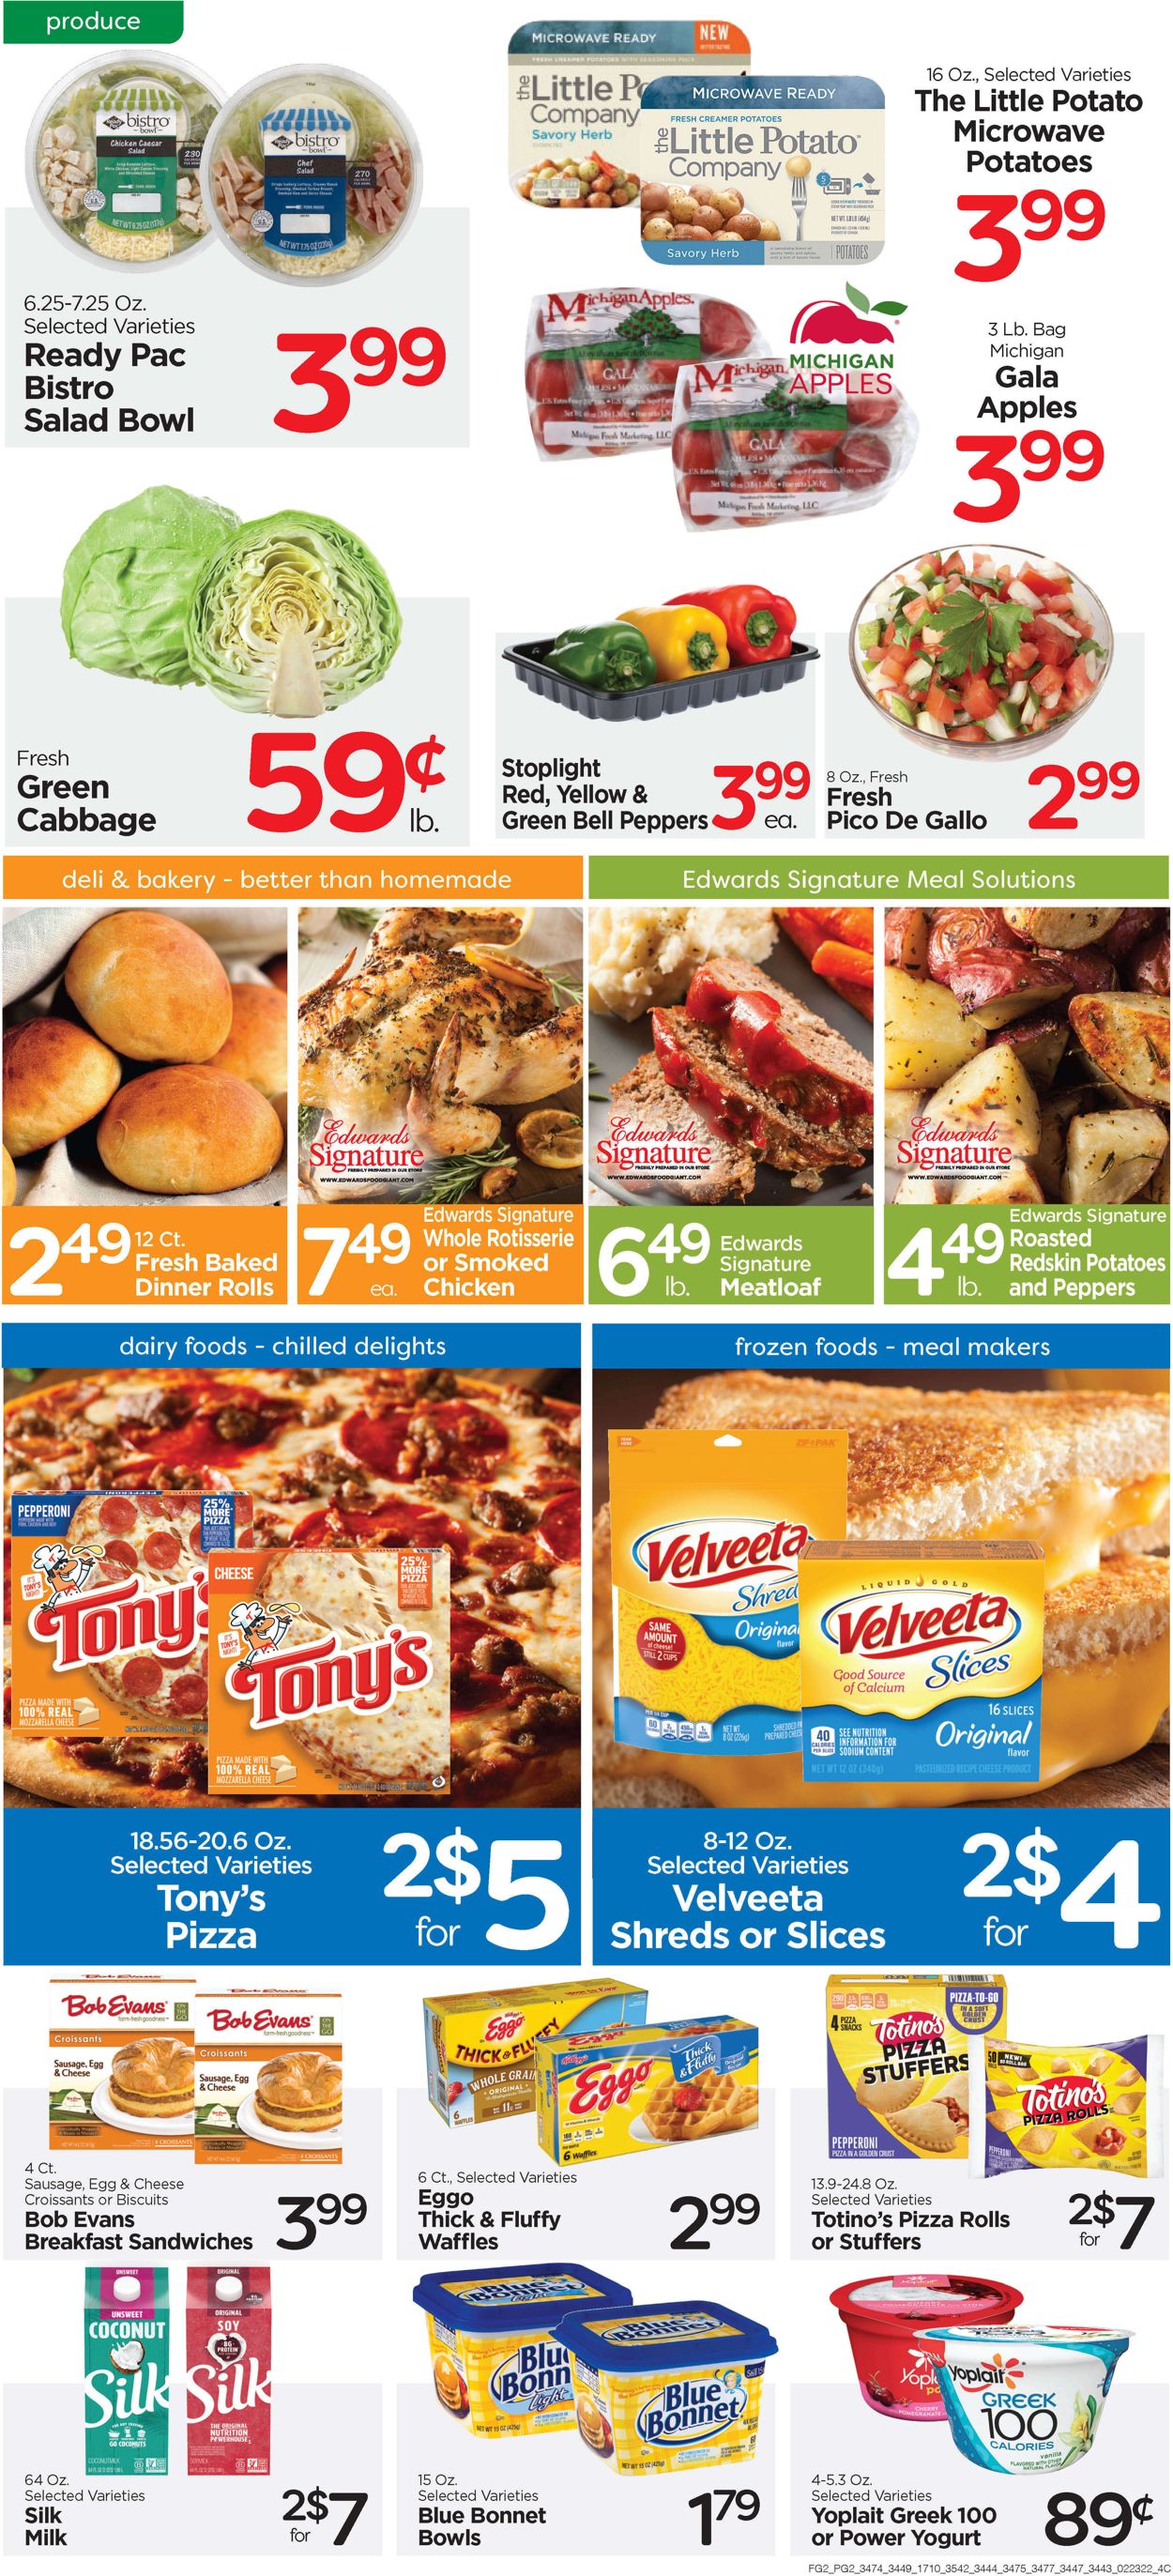 Catalogue Edwards Food Giant from 02/23/2022